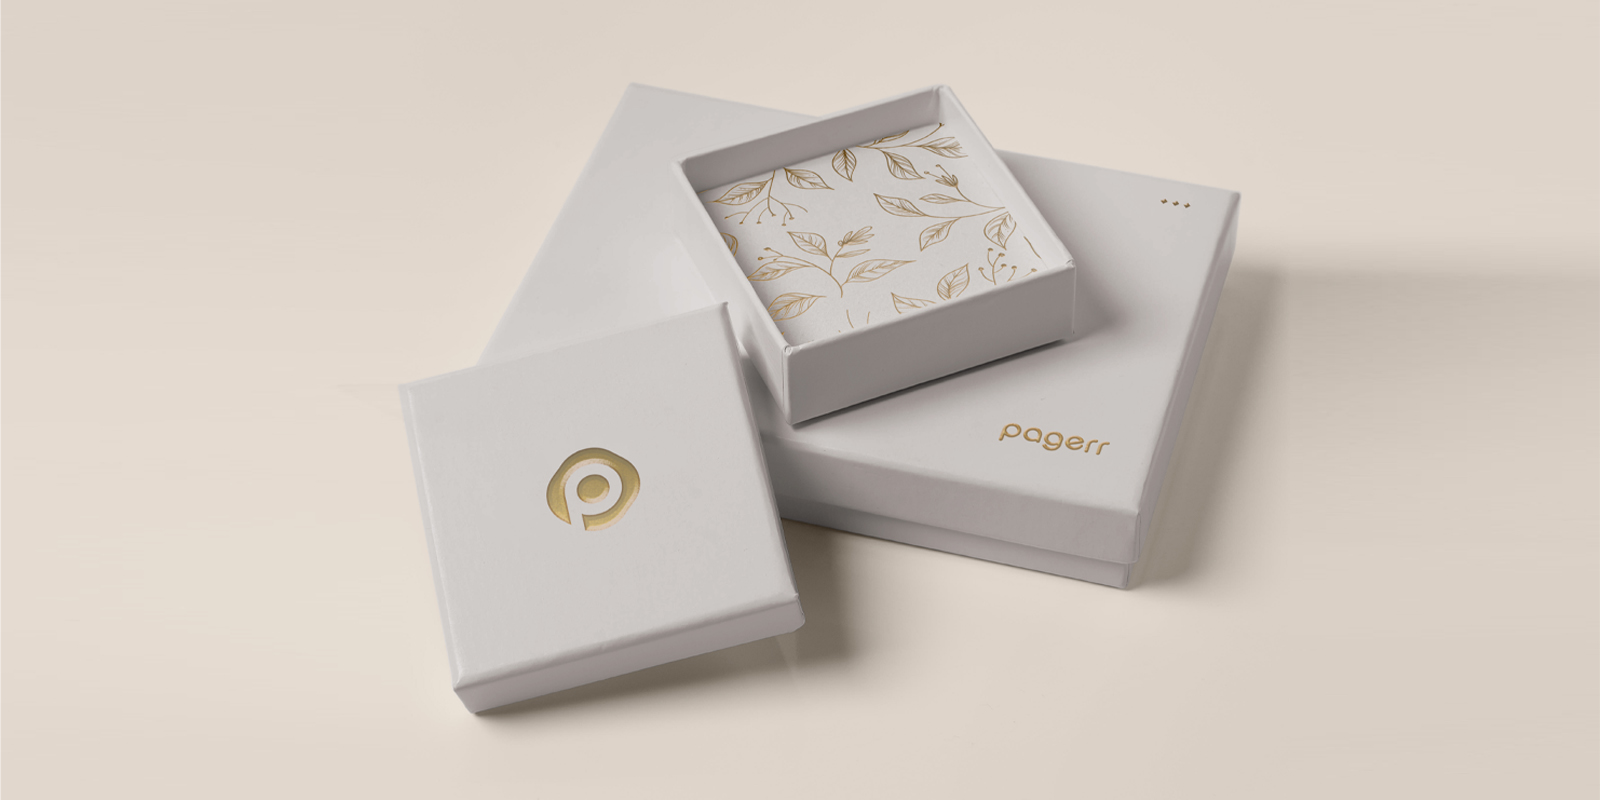 Product boxes in Rockingham - Print with Pagerr